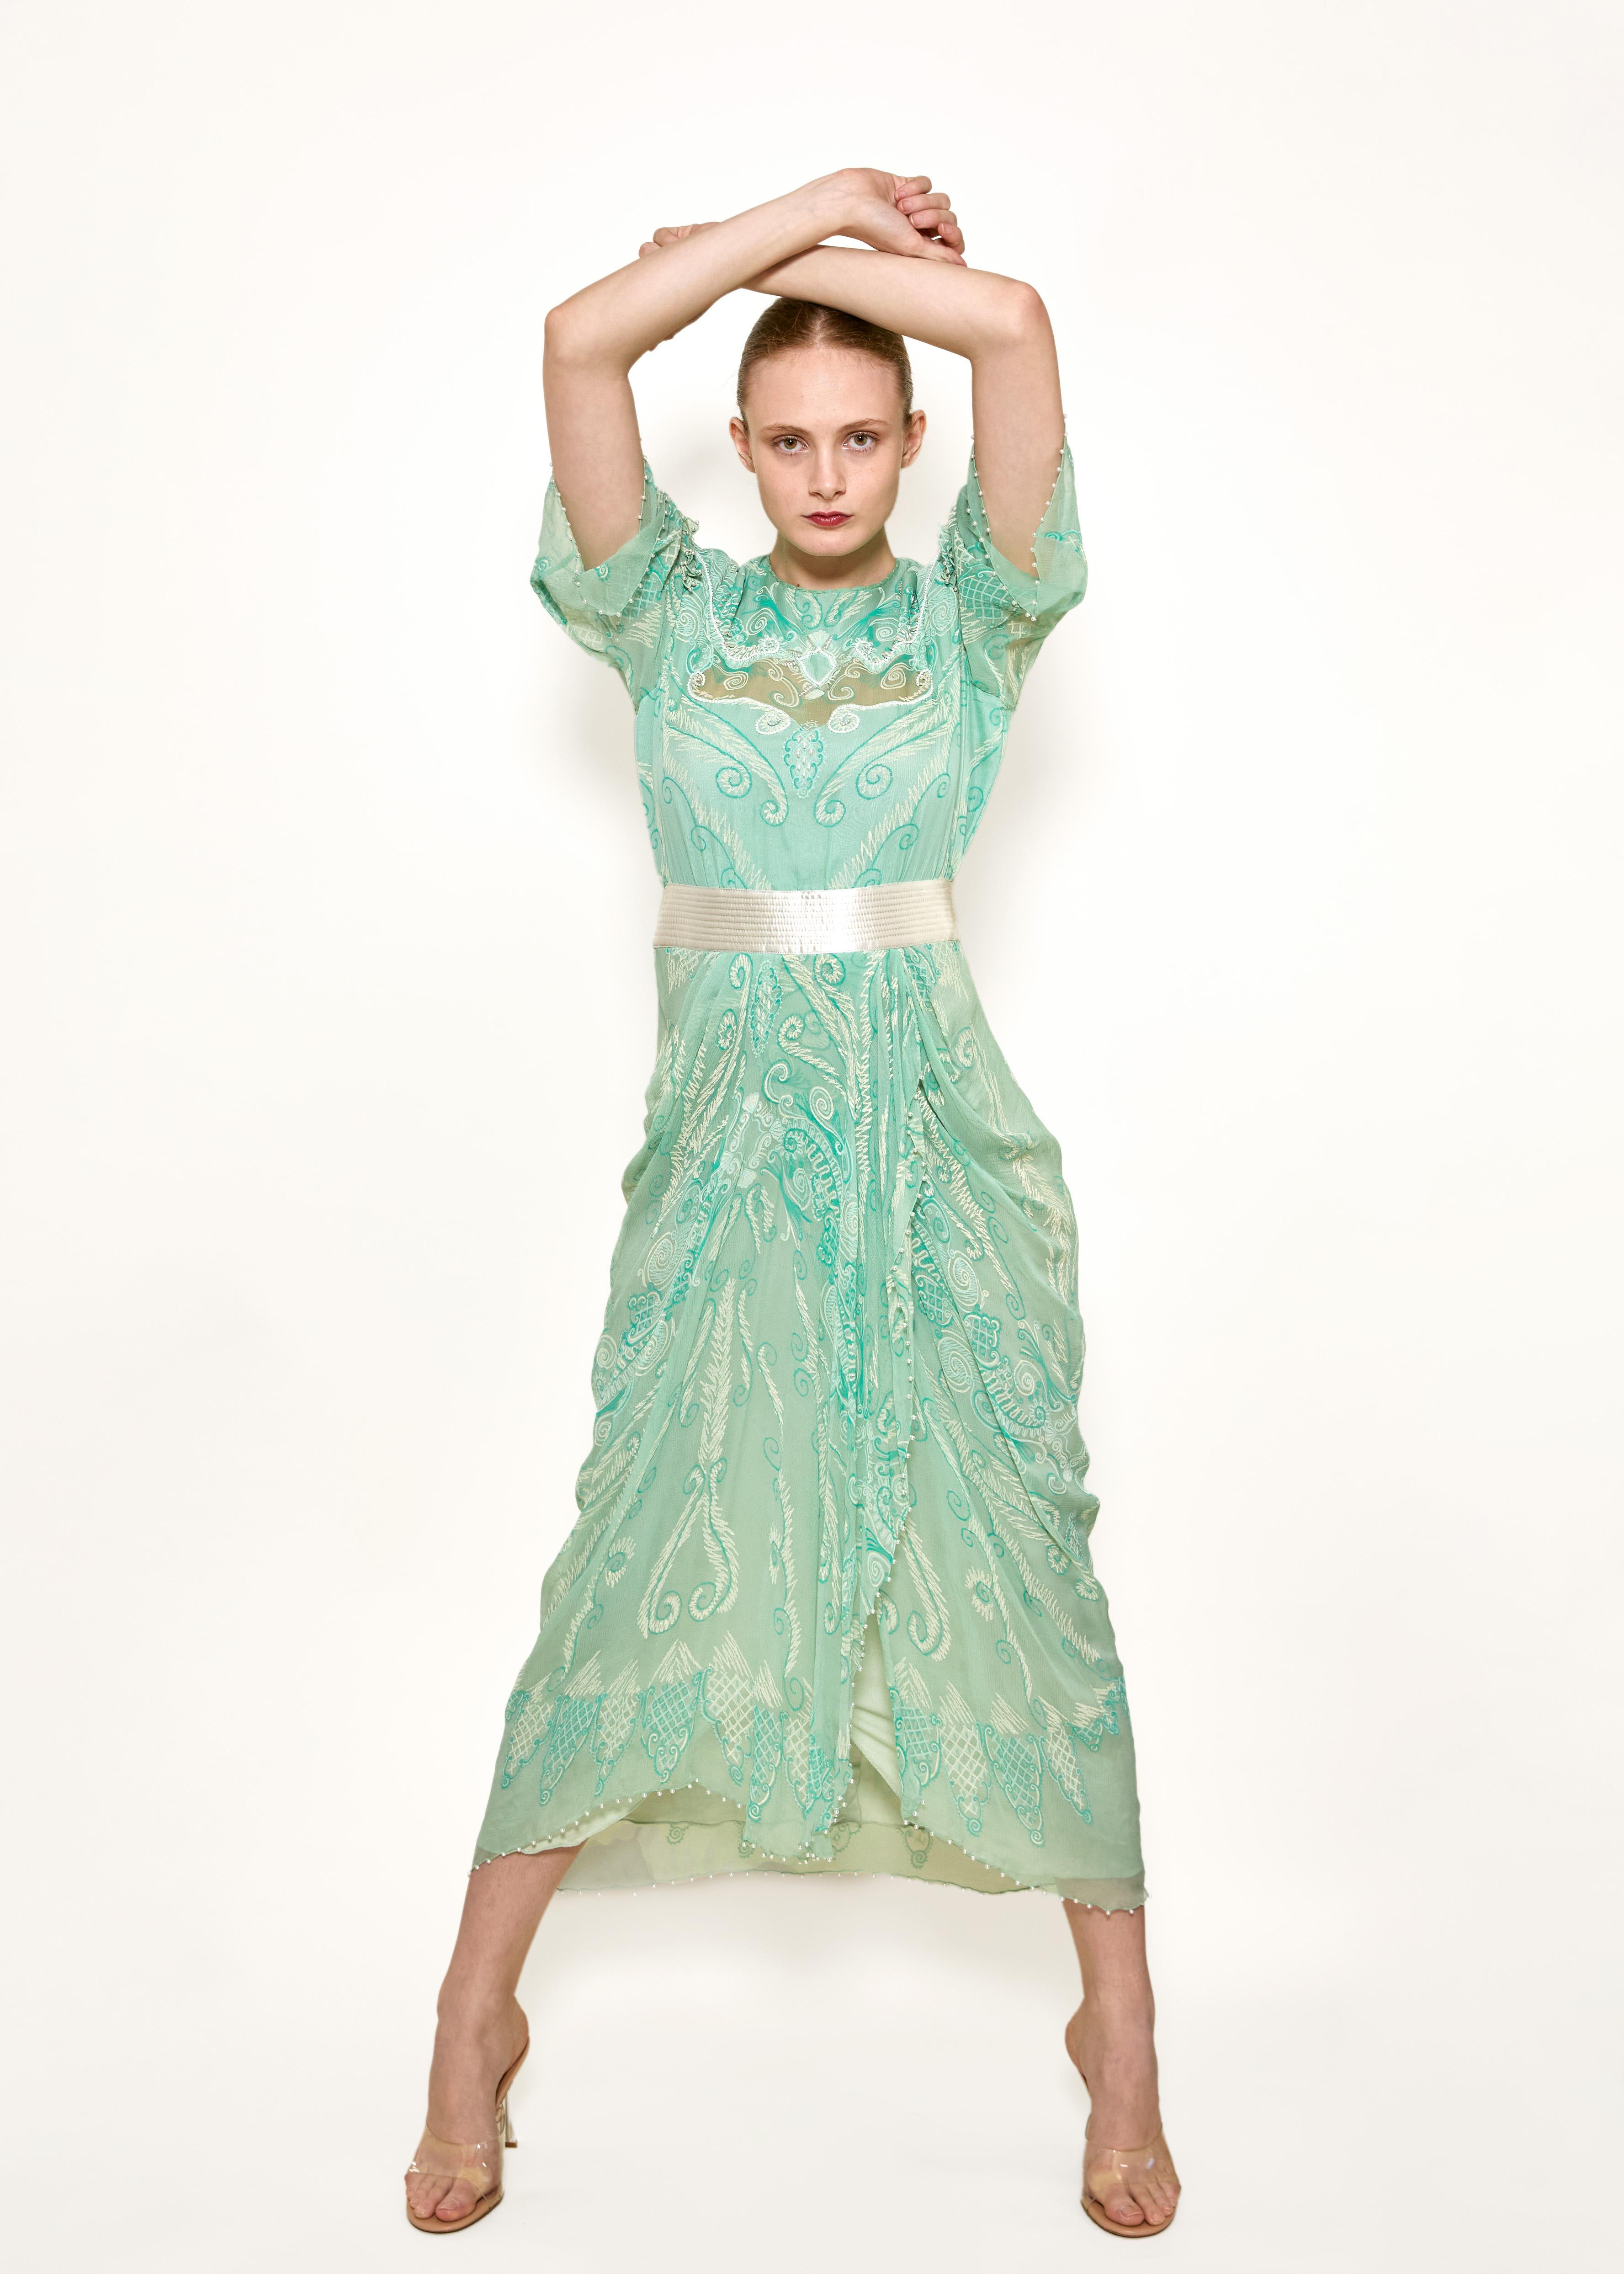 Zandra Rhodes S/S 1989 Mint Green Pearl Trimmed Satin Belt Dress In Excellent Condition For Sale In Los Angeles, CA